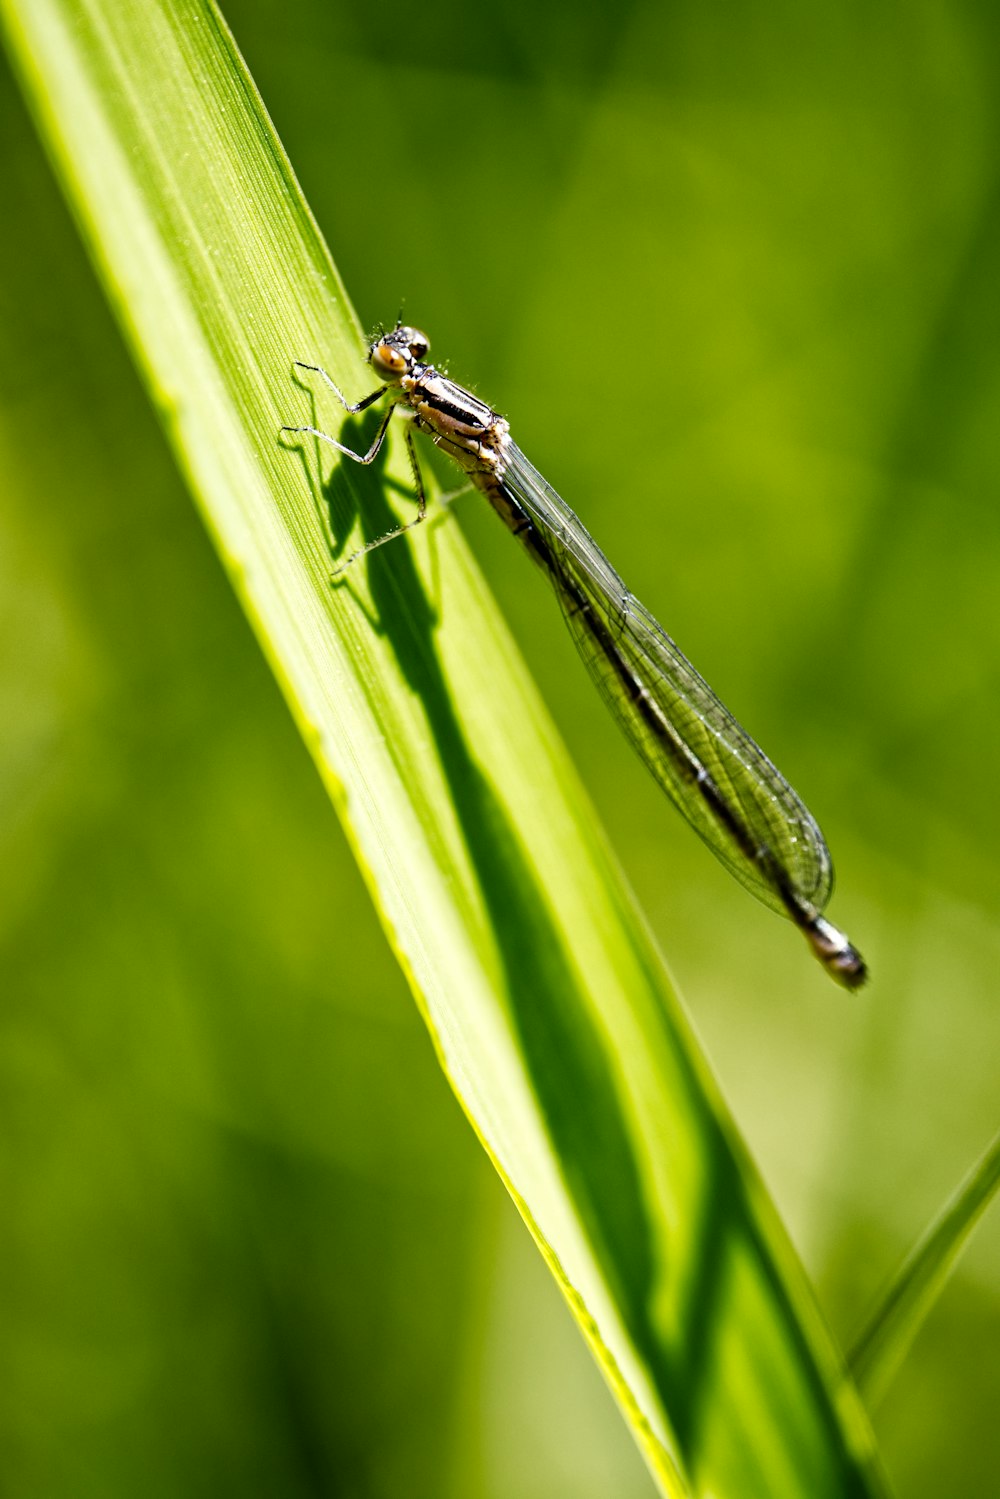 green damselfly perched on green leaf in close up photography during daytime